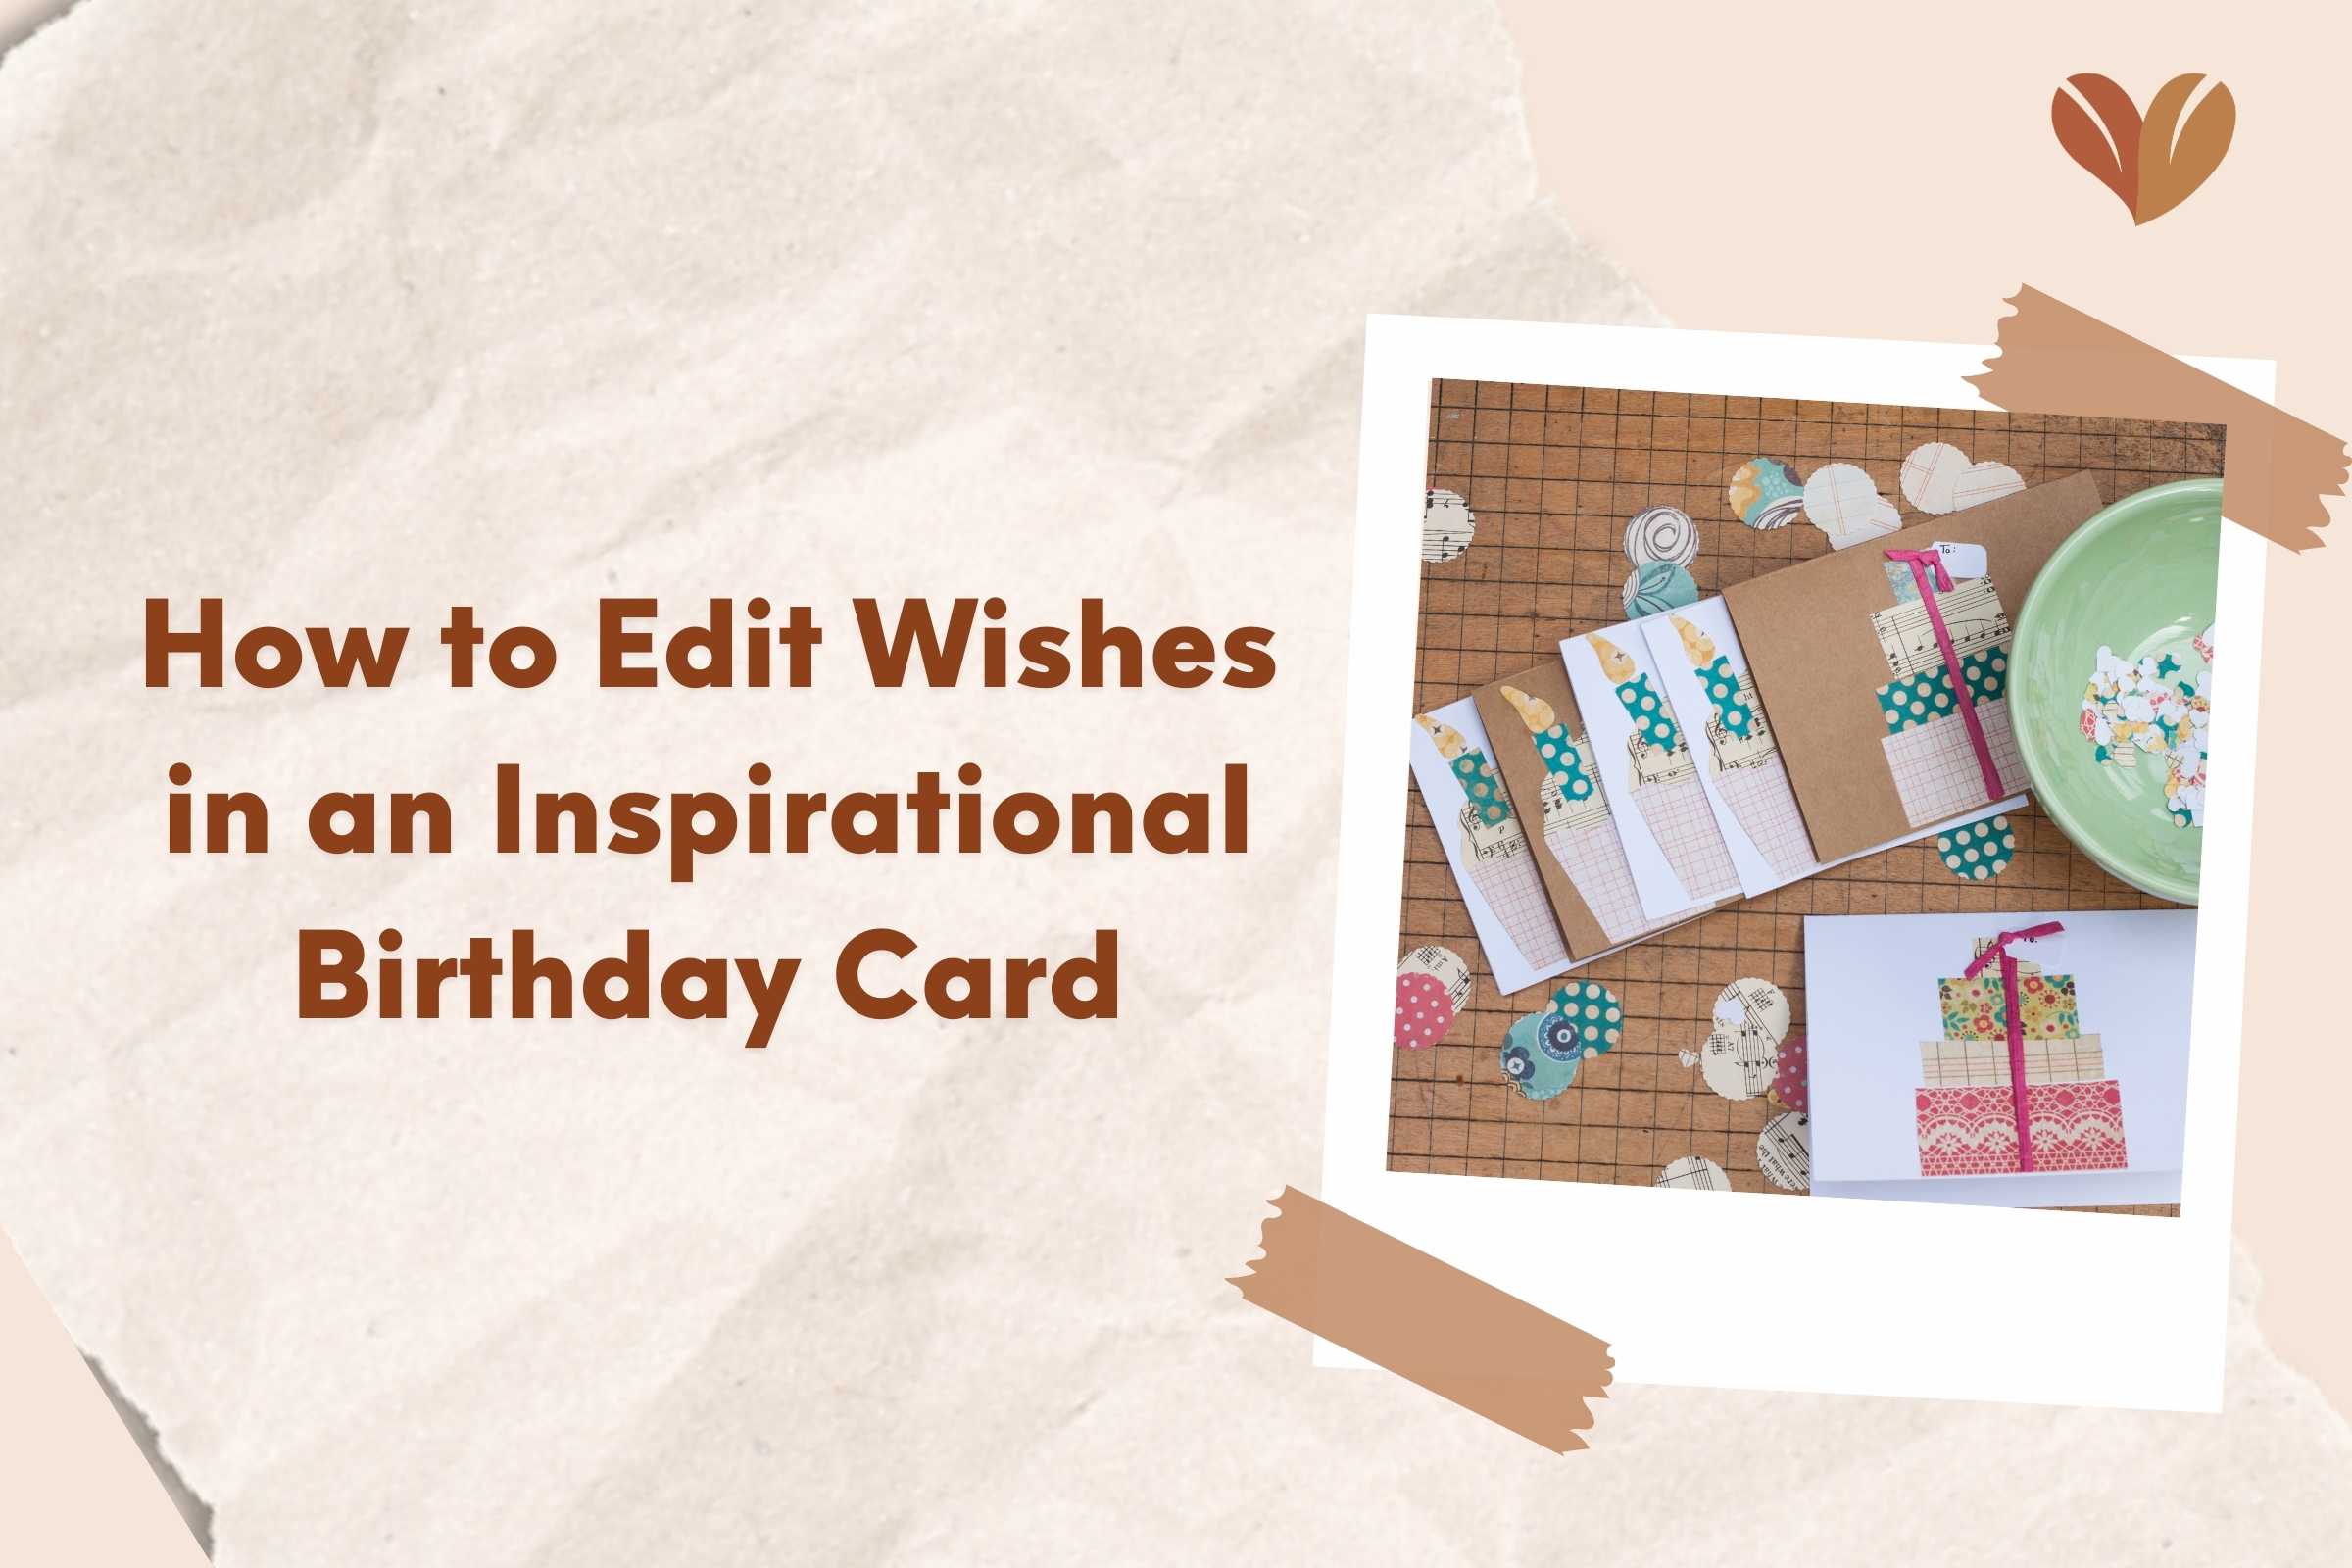 Uplifting words take center stage in these inspirational birthday quotes for a friend.